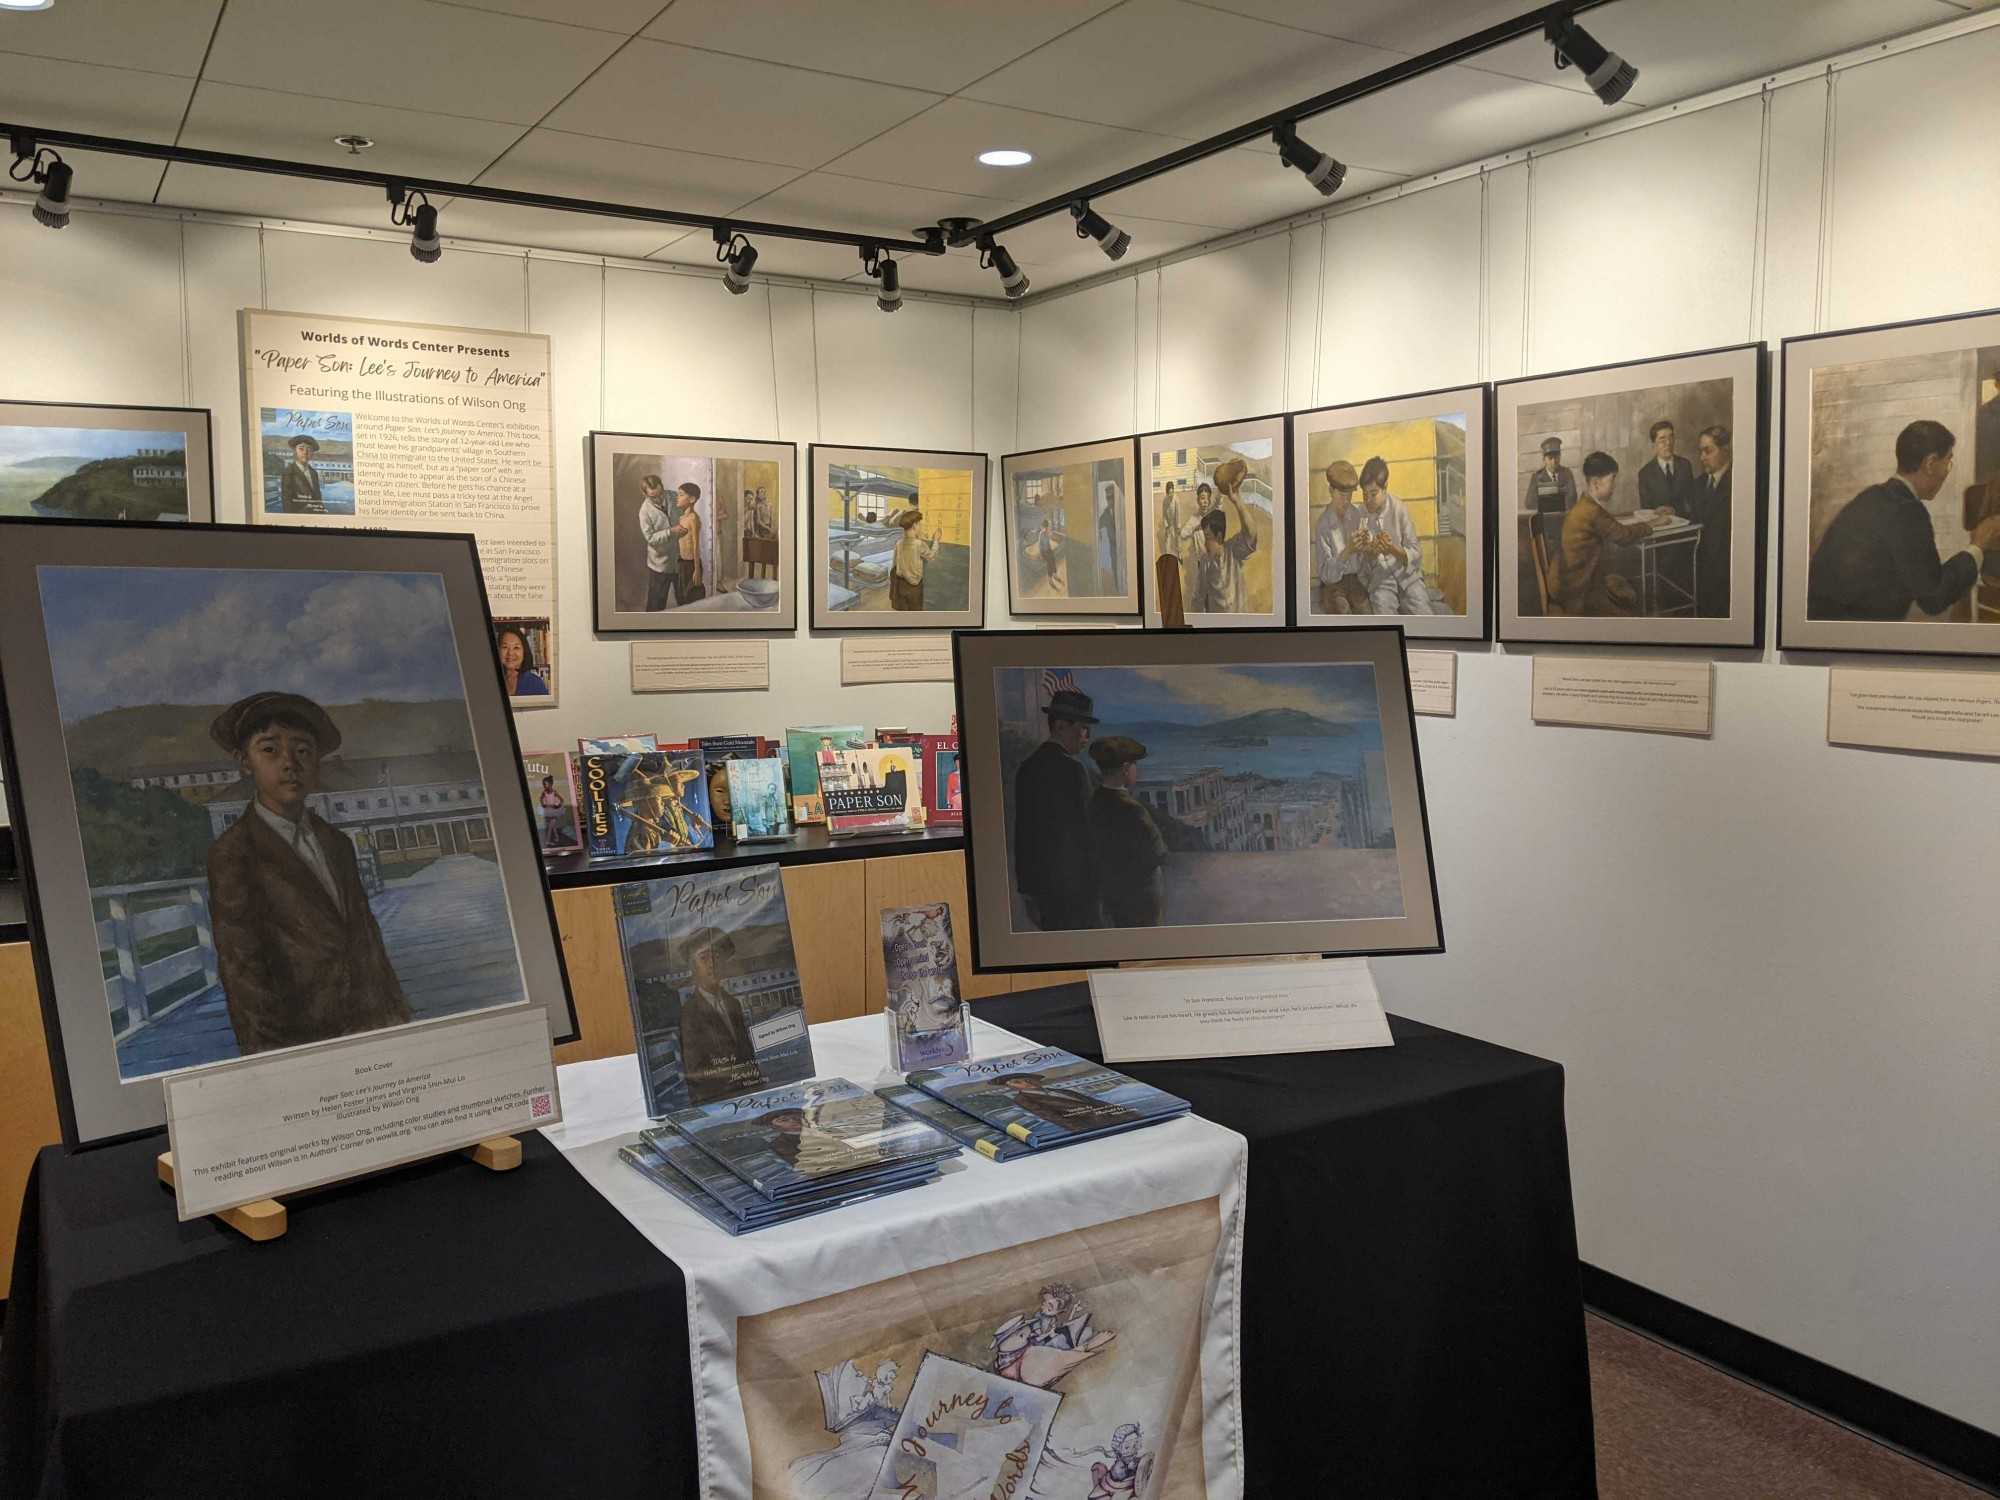 The "Paper Son: Lee’s Journey to America" will be on display until Dec. 16.